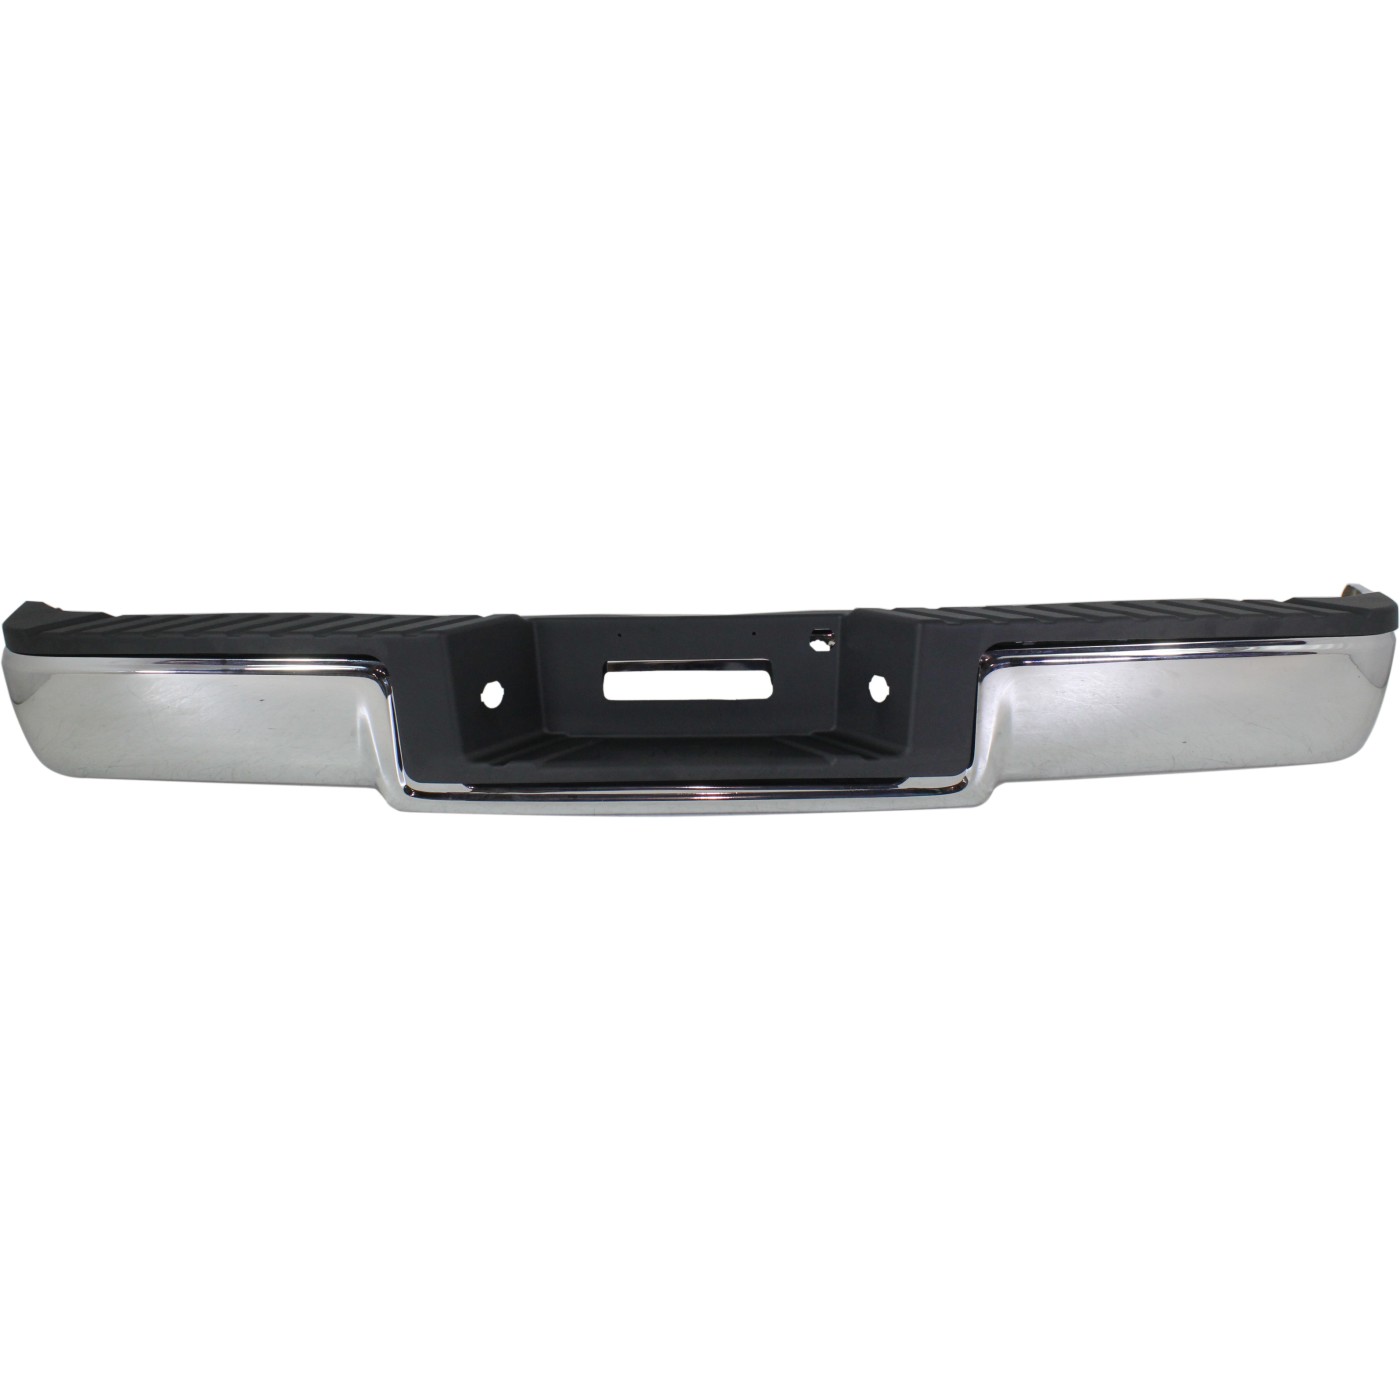 Step Bumper Assembly For 2004-2006 Ford F-150 Steel Chrome Styleside